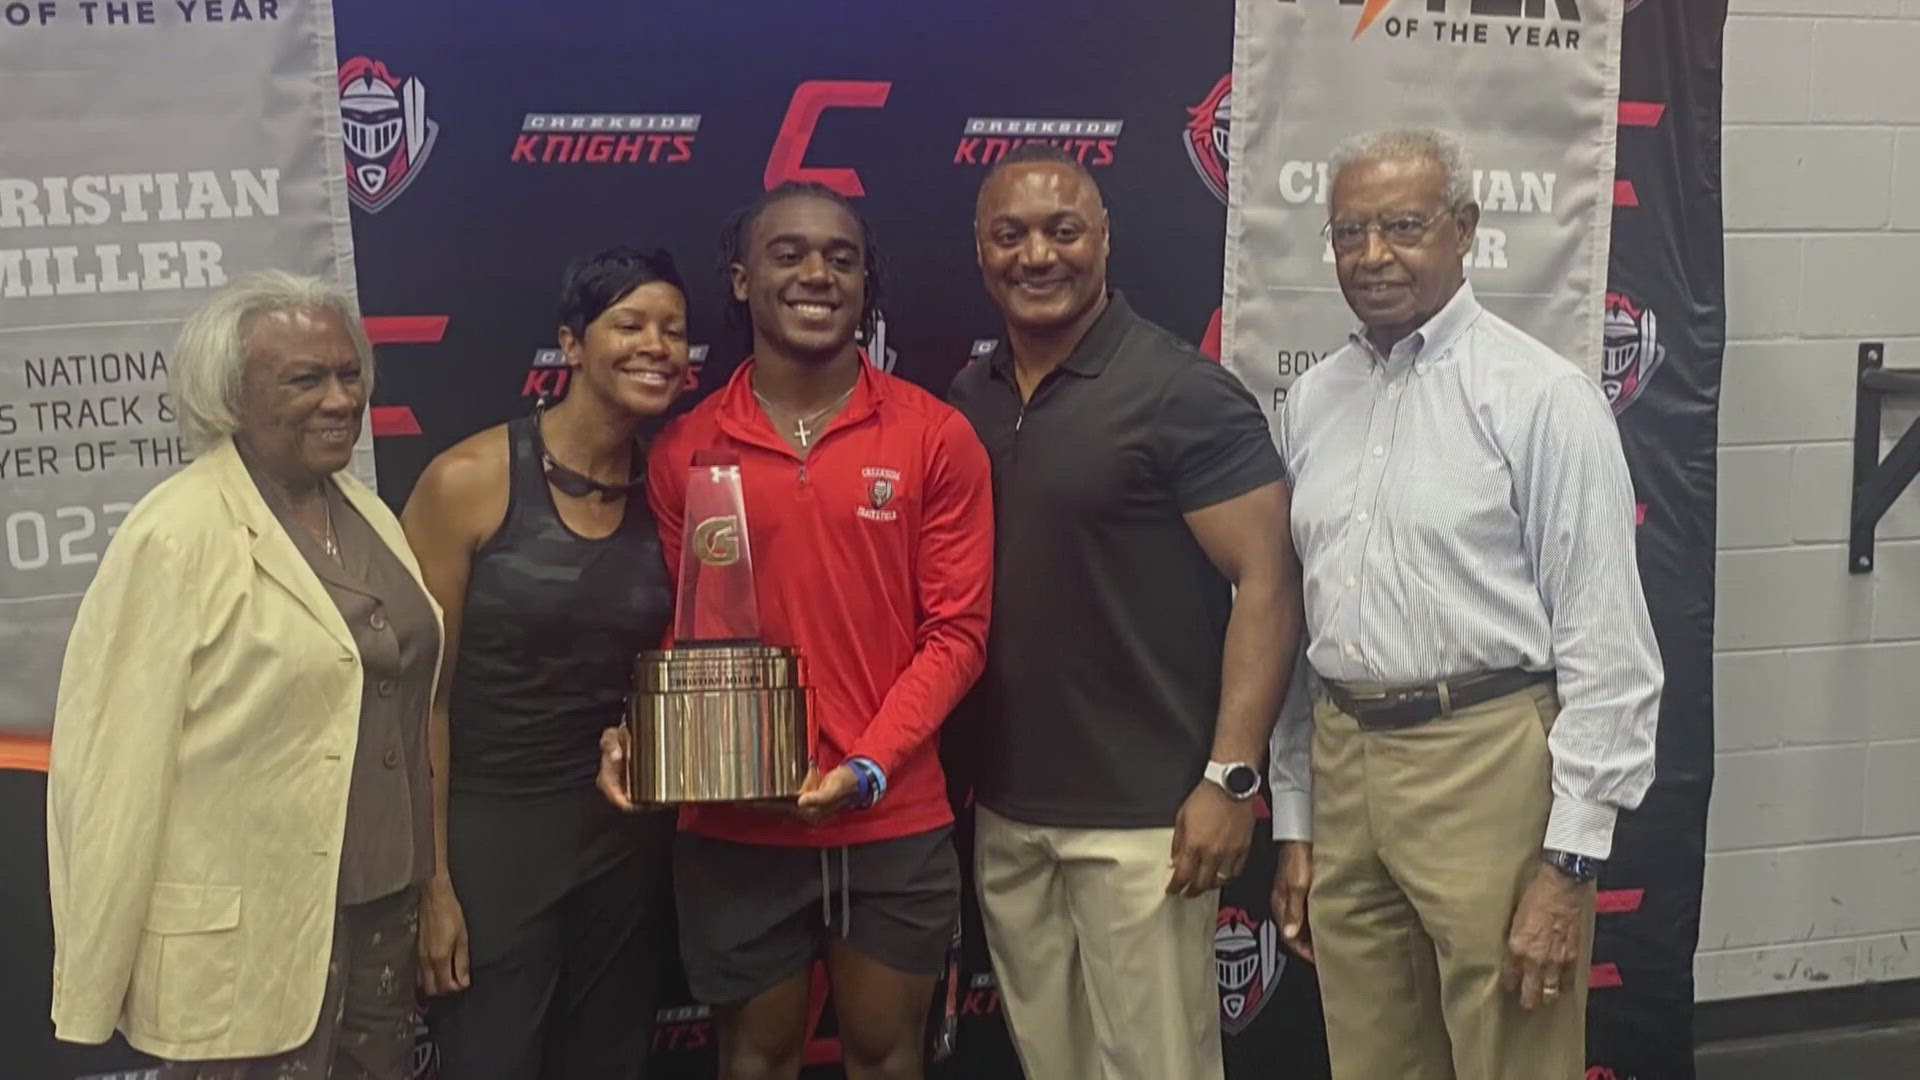 Christian Miller is the first athlete from the First Coast to win the national honor for his work on the track, as his trophy case gets more and more full.